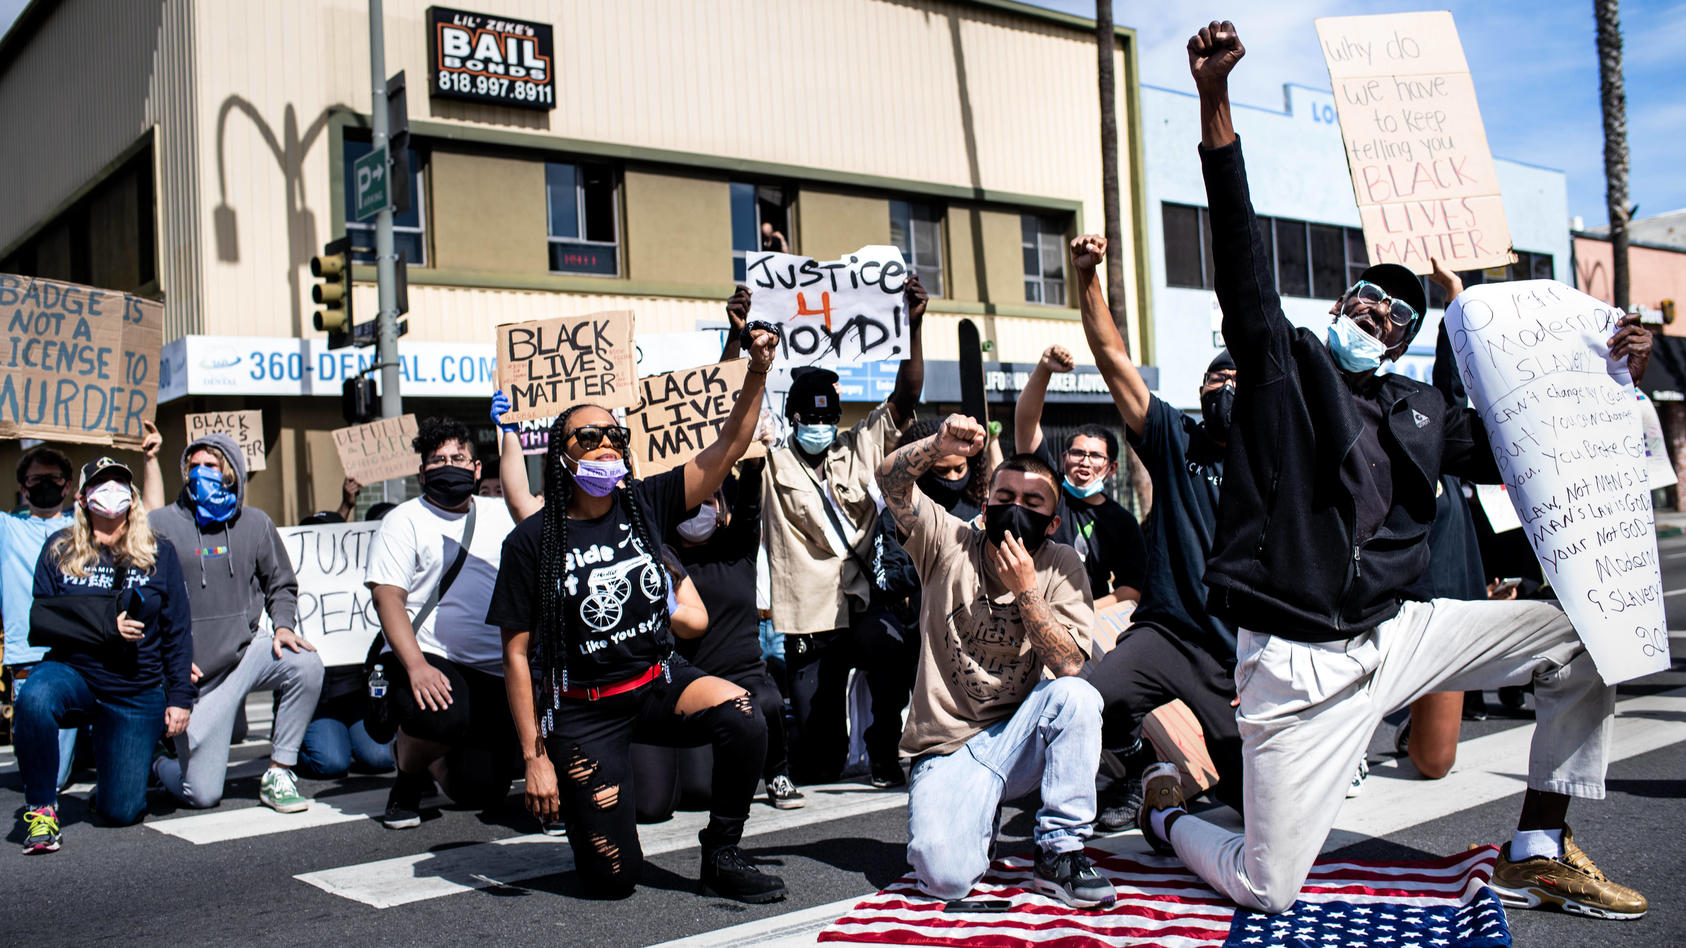 June 1, 2020, Van Nuys, California, USA: Protesters take a knee on Van Nuys Boulevard during a peaceful protest with Bl